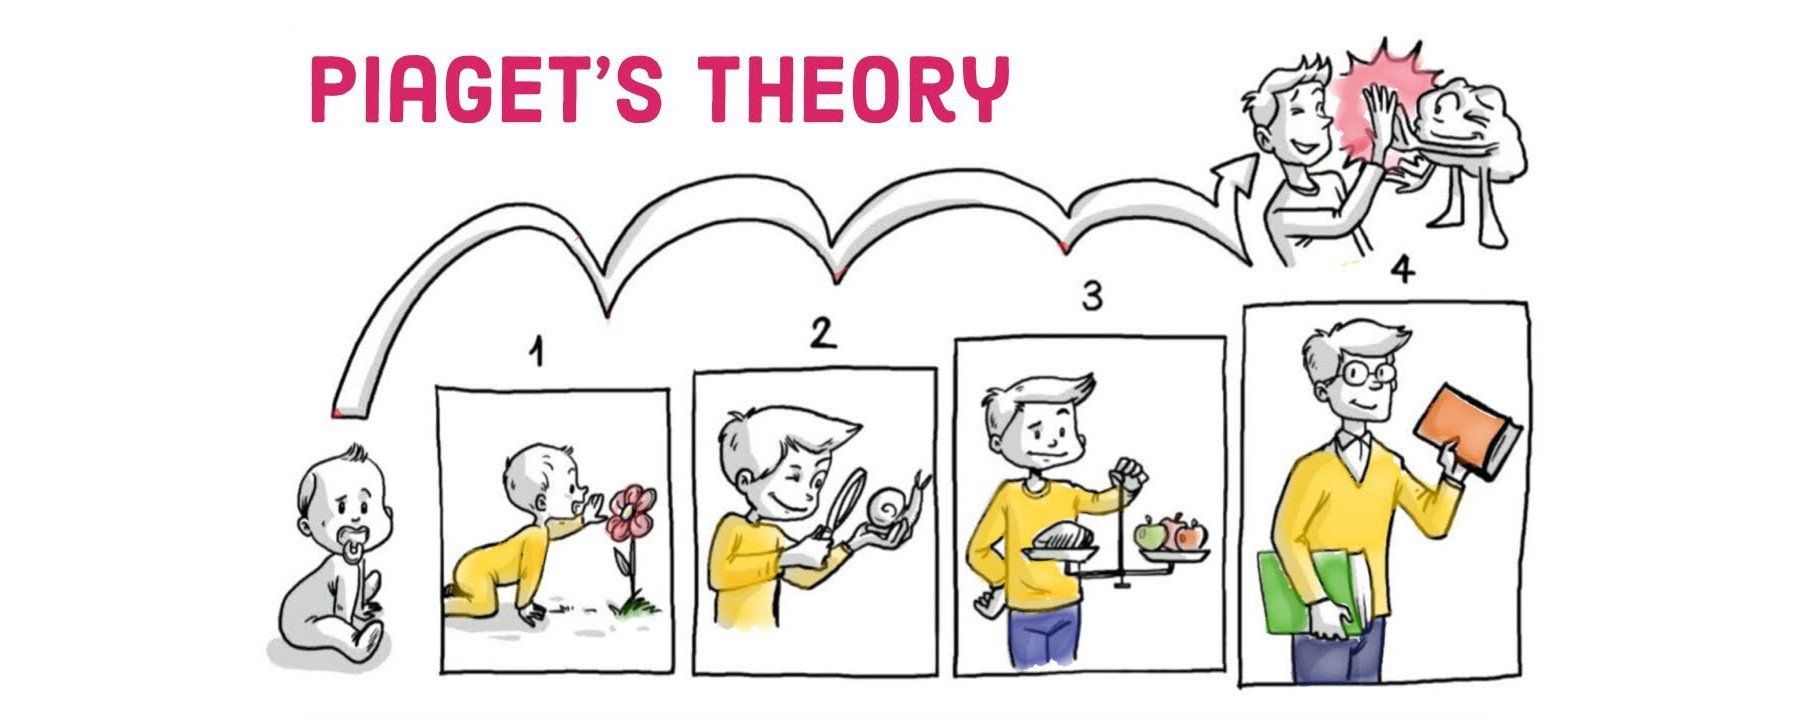 Piaget's Theory of Cognitive Development - 4 easy stages